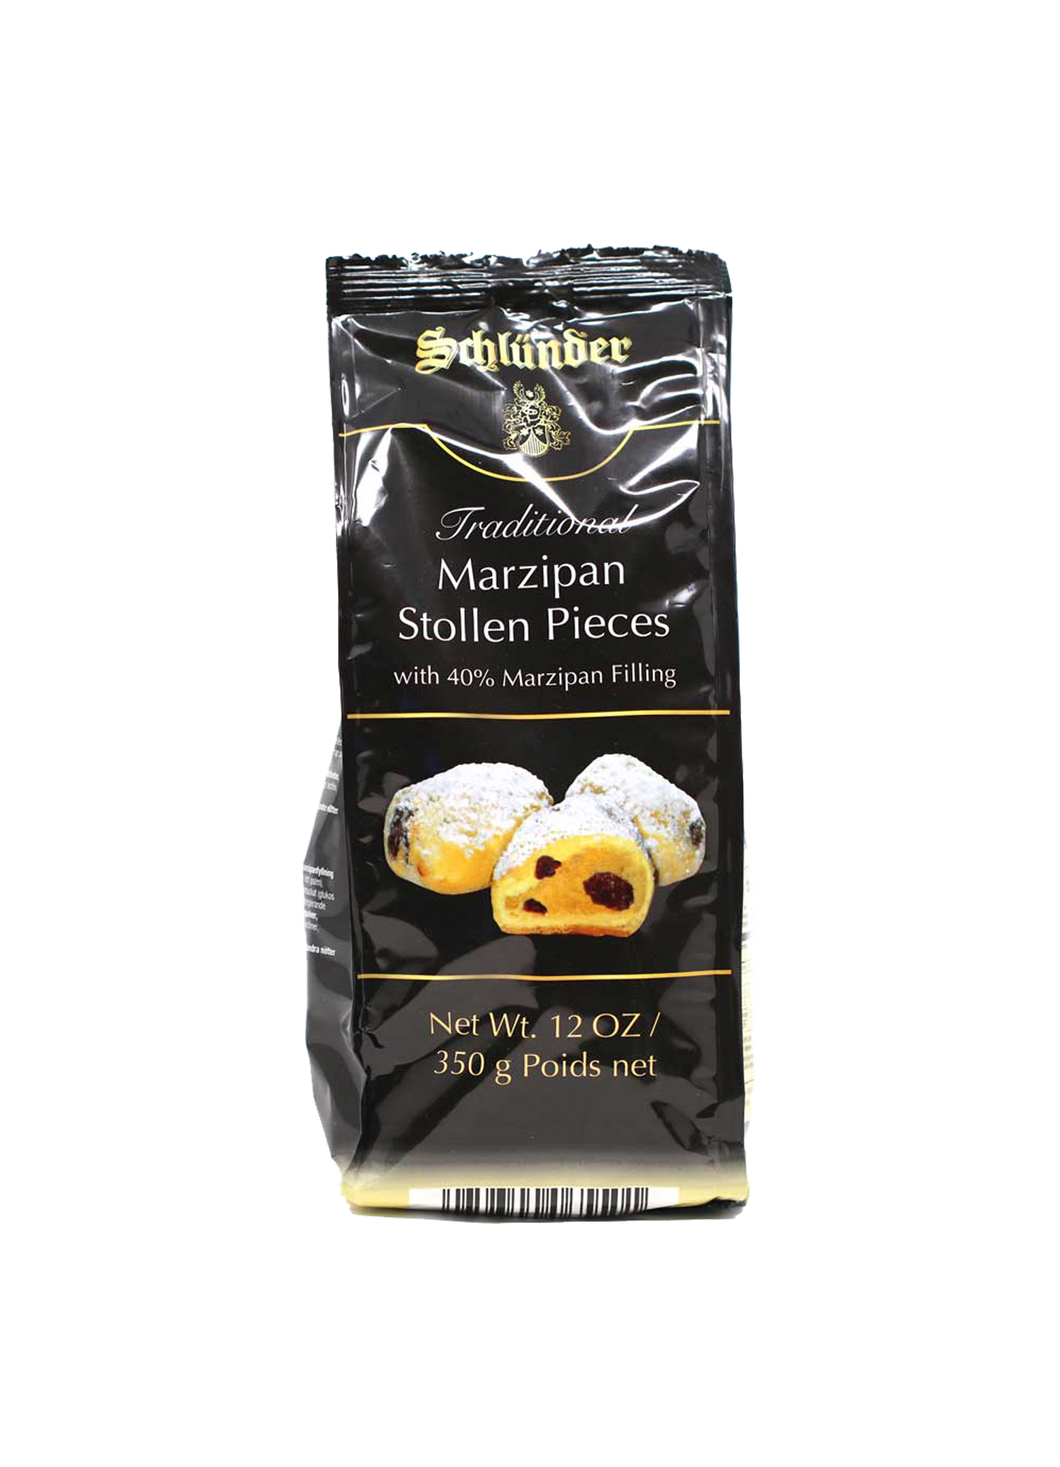 Traditional German Marzipan Stollen Pieces with 40% filling 350g